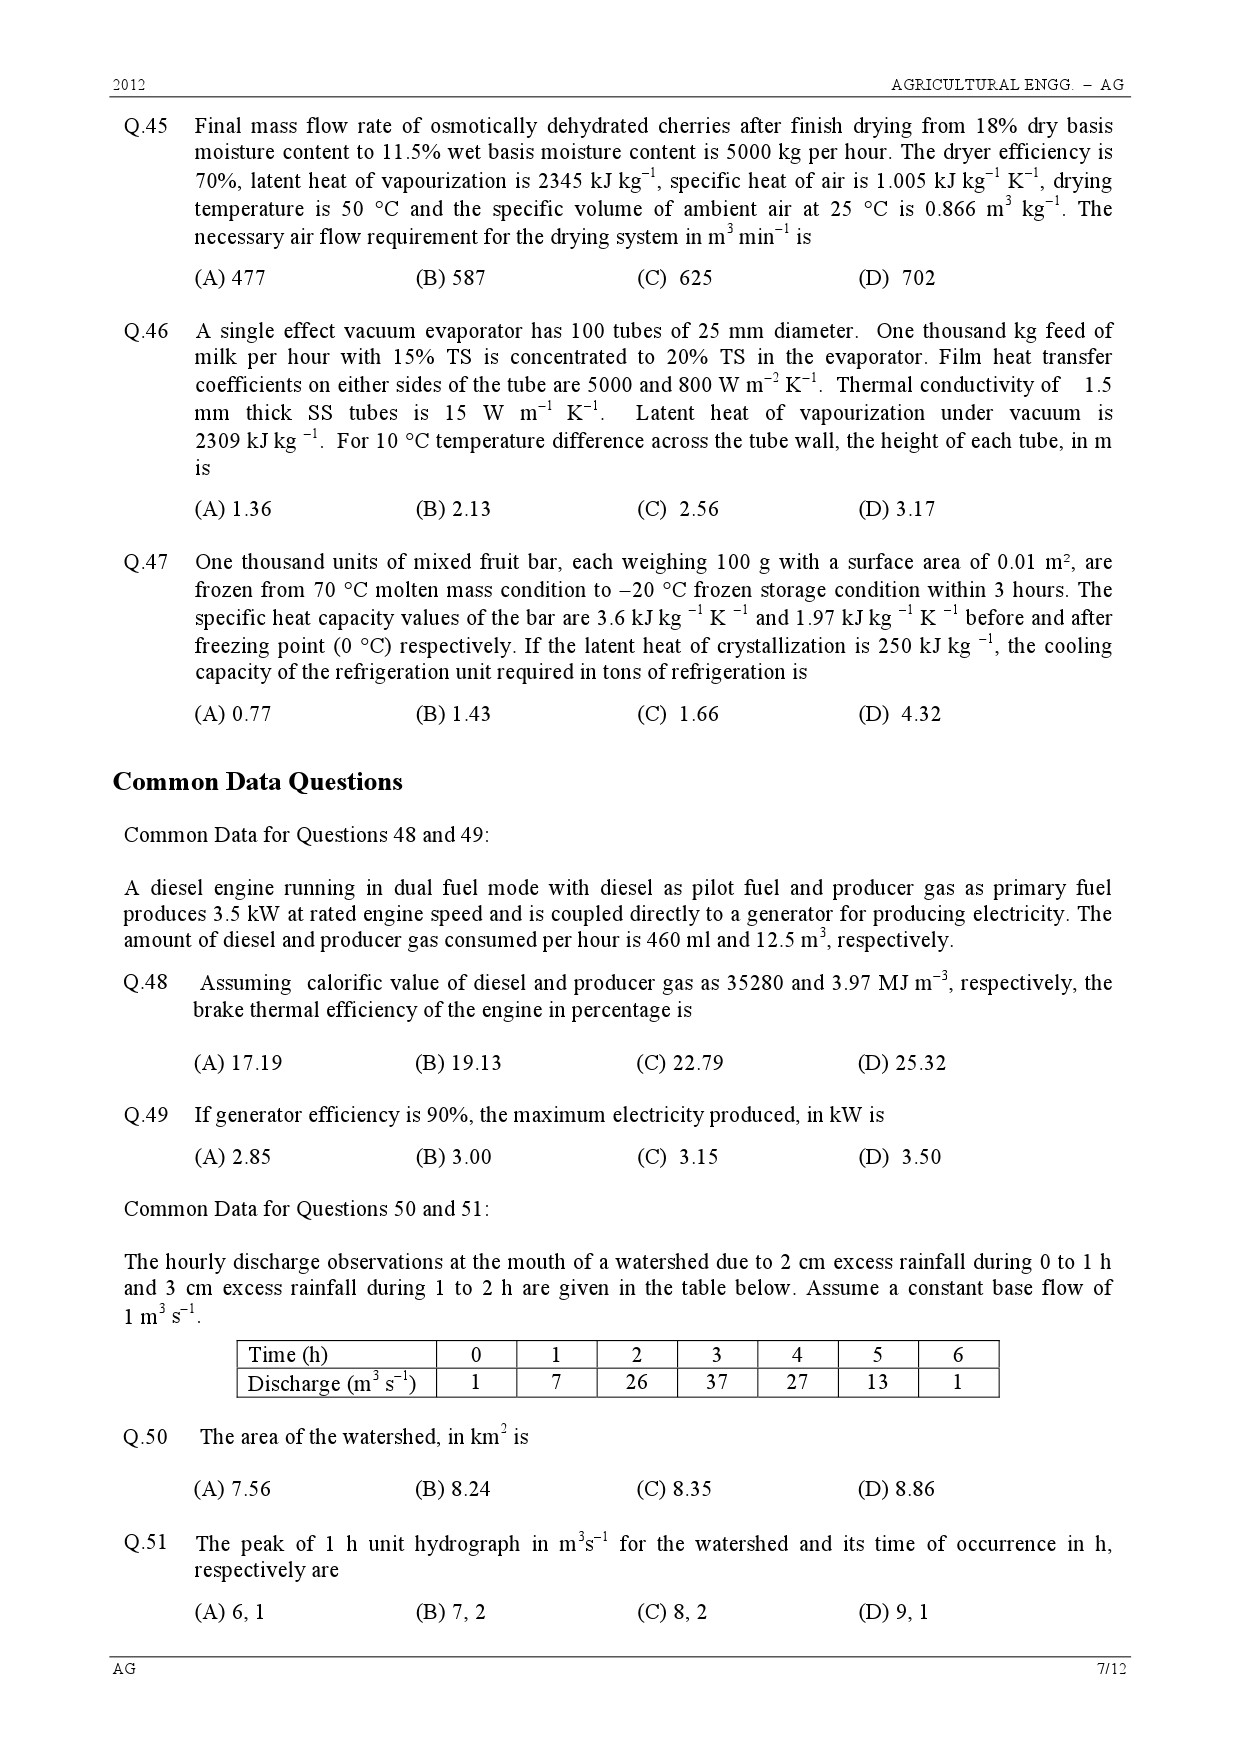 GATE Exam Question Paper 2012 Agricultural Engineering 7